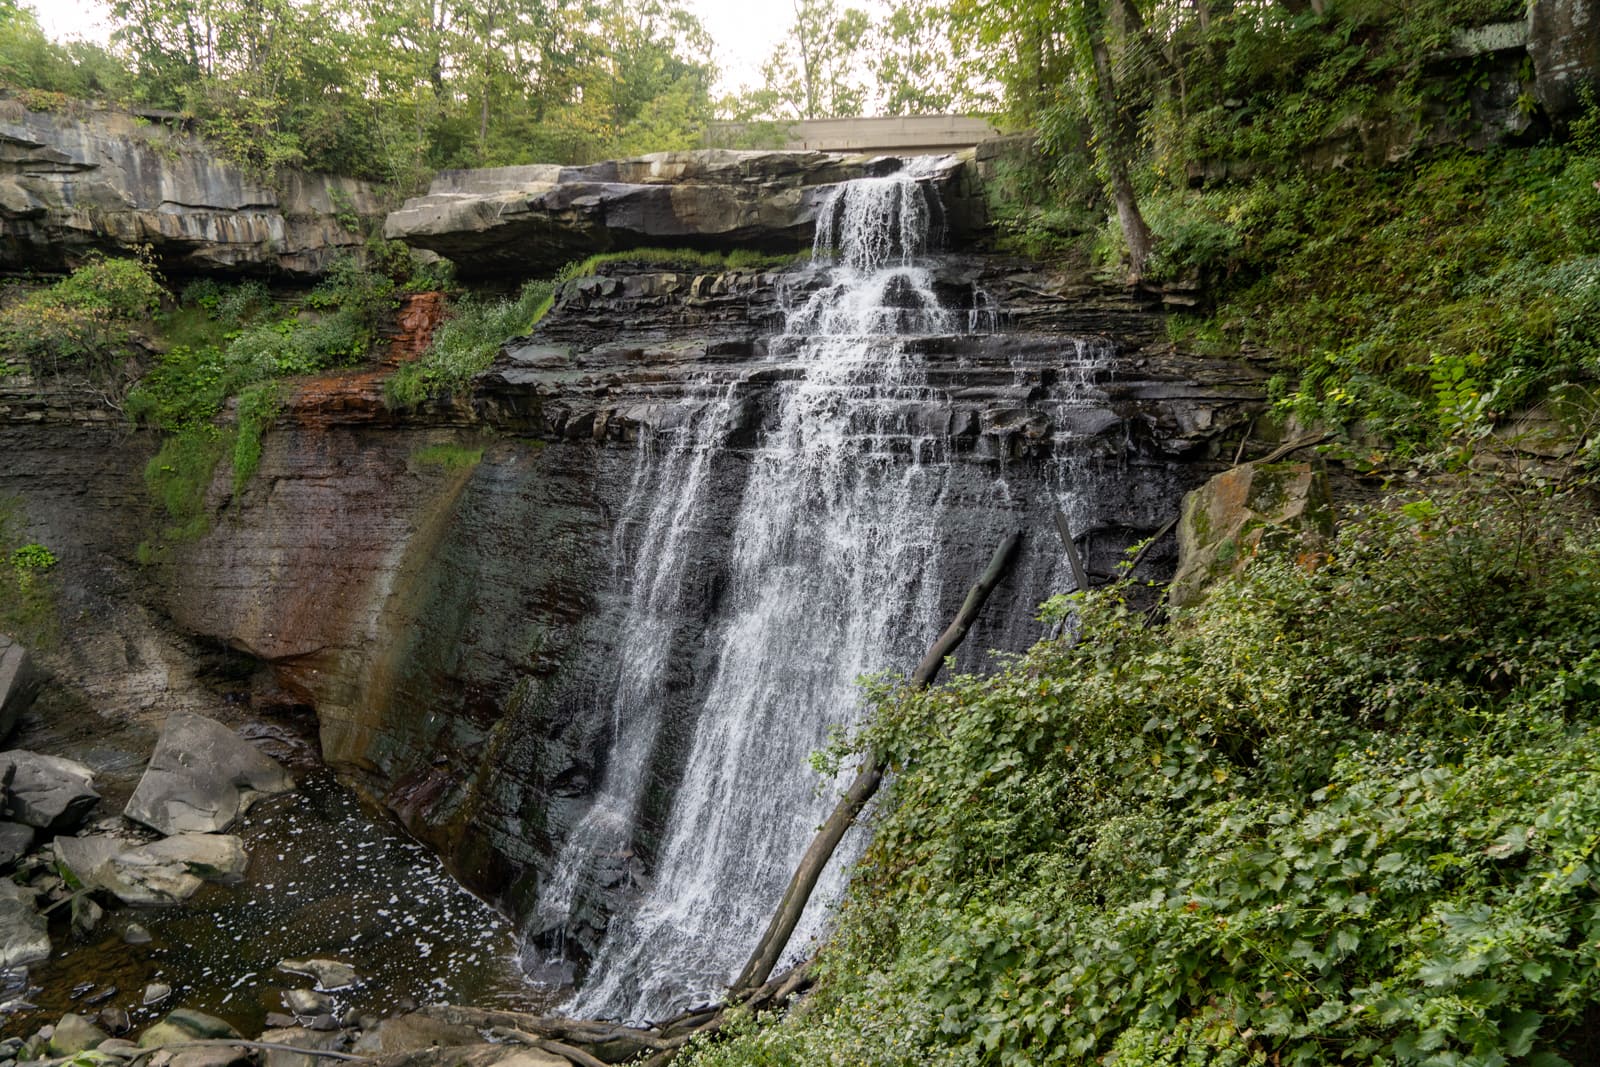 Things to do in Cuyahoga Valley National Park (+ a one day itinerary!)